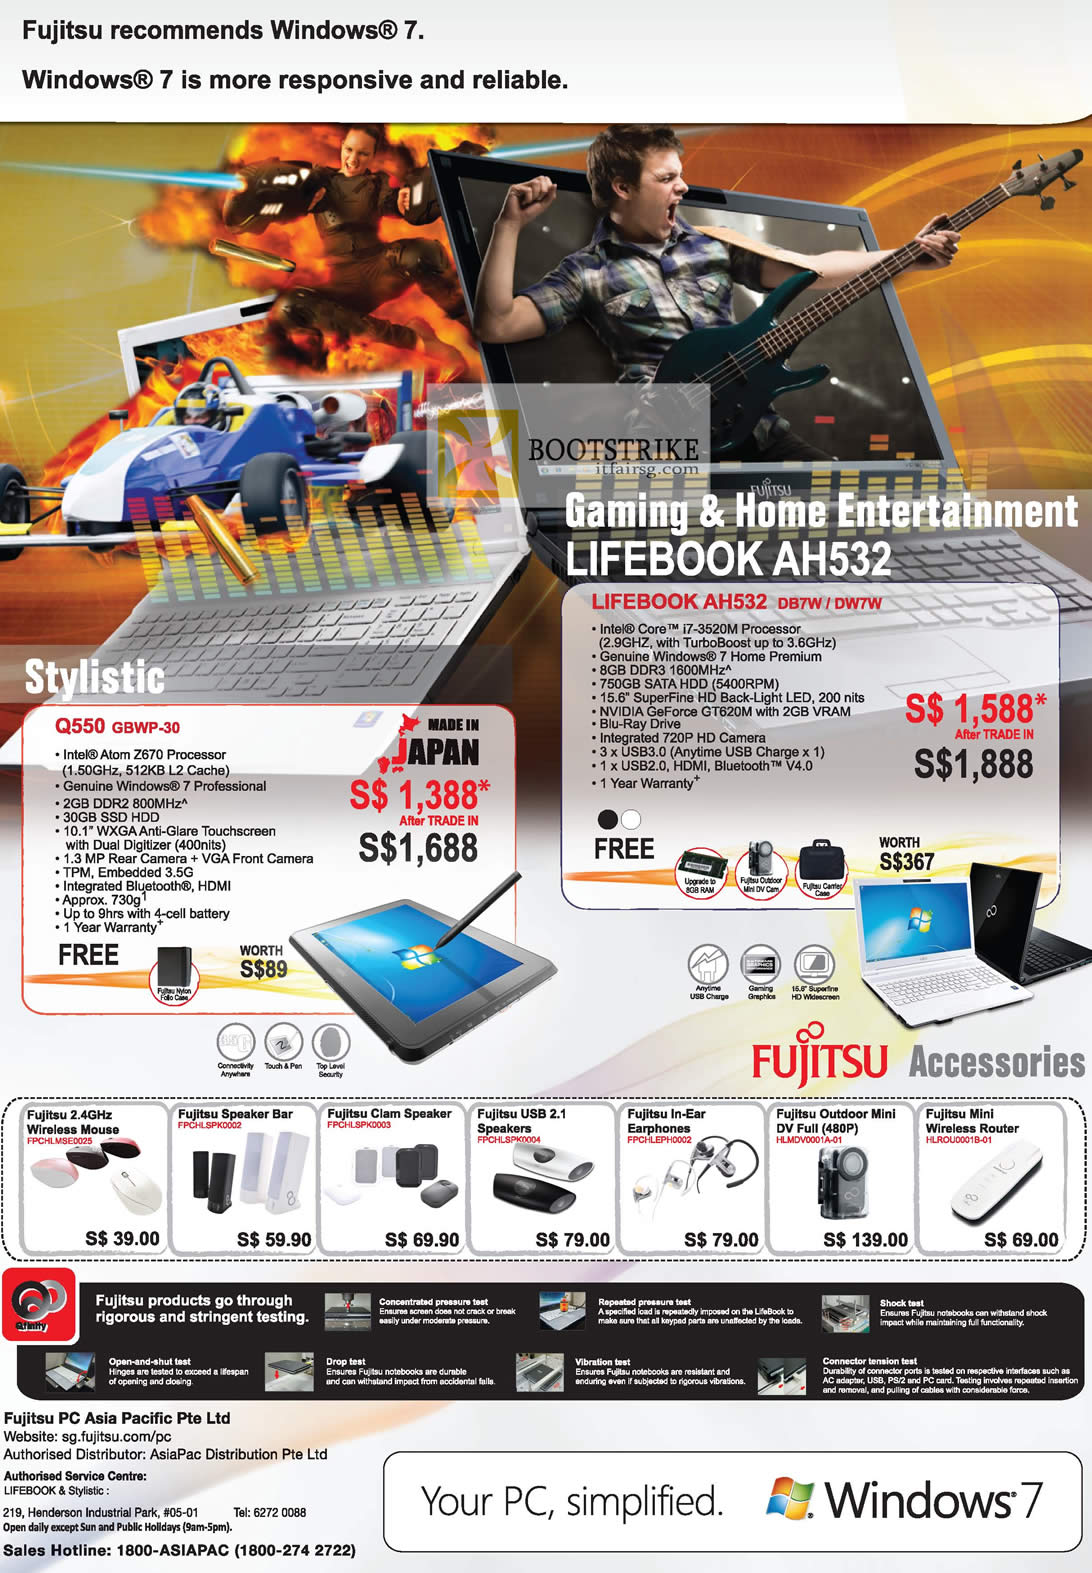 PC SHOW 2012 price list image brochure of Fujitsu Notebooks Q550 GBWP-30, Lifebook AH532 DB7W DW7W, Accessories Mouse, Speaker Bar, Earphones, Mini Router